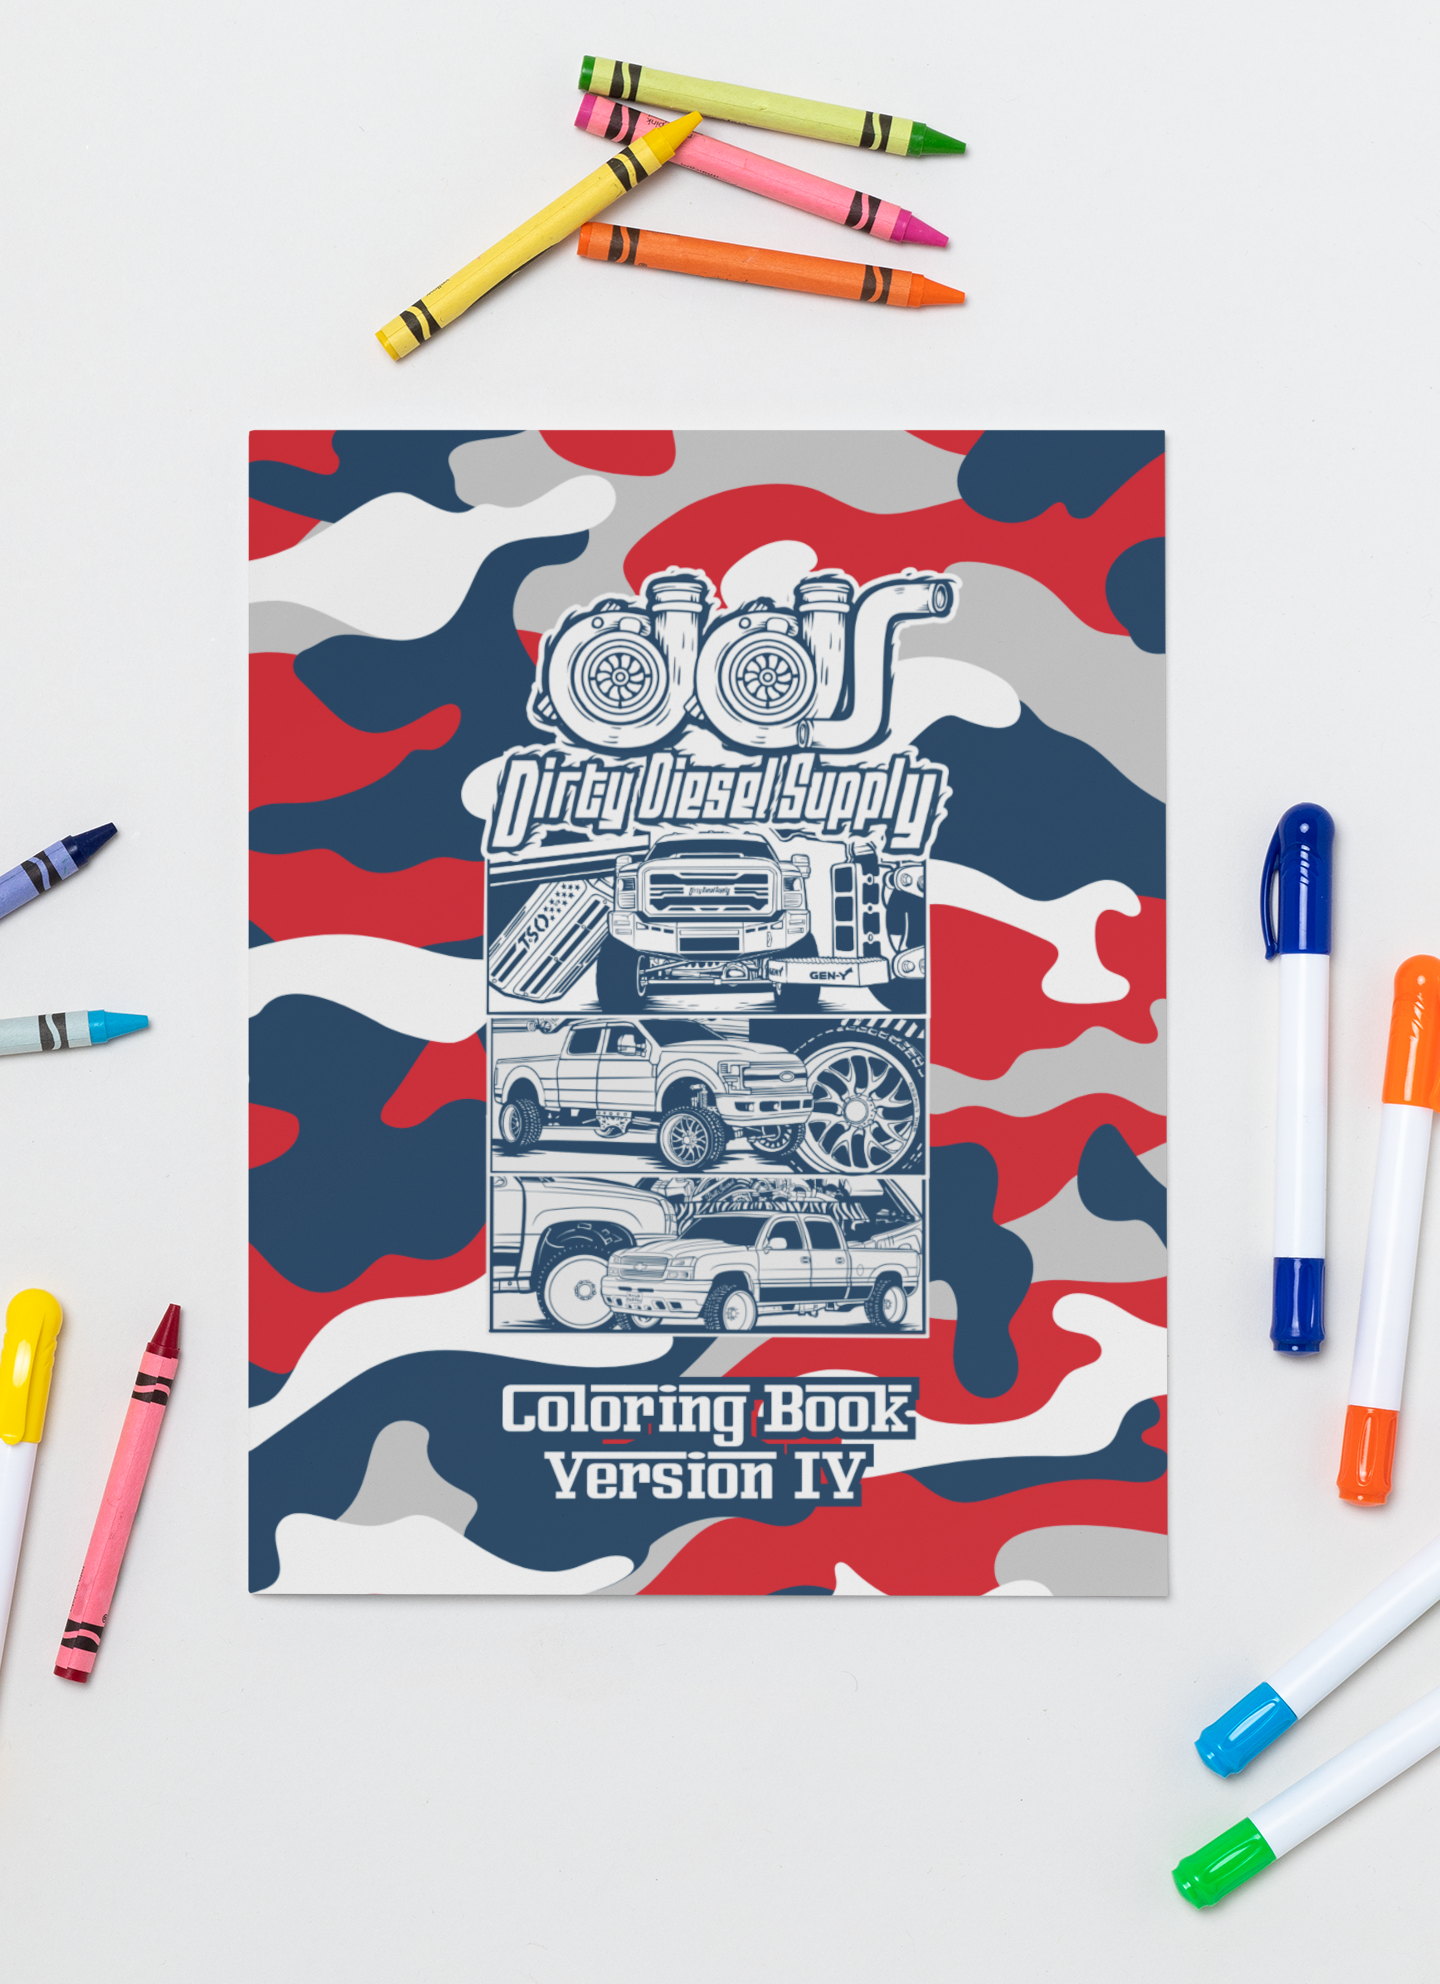 Dirty Diesel Supply Coloring Book V4